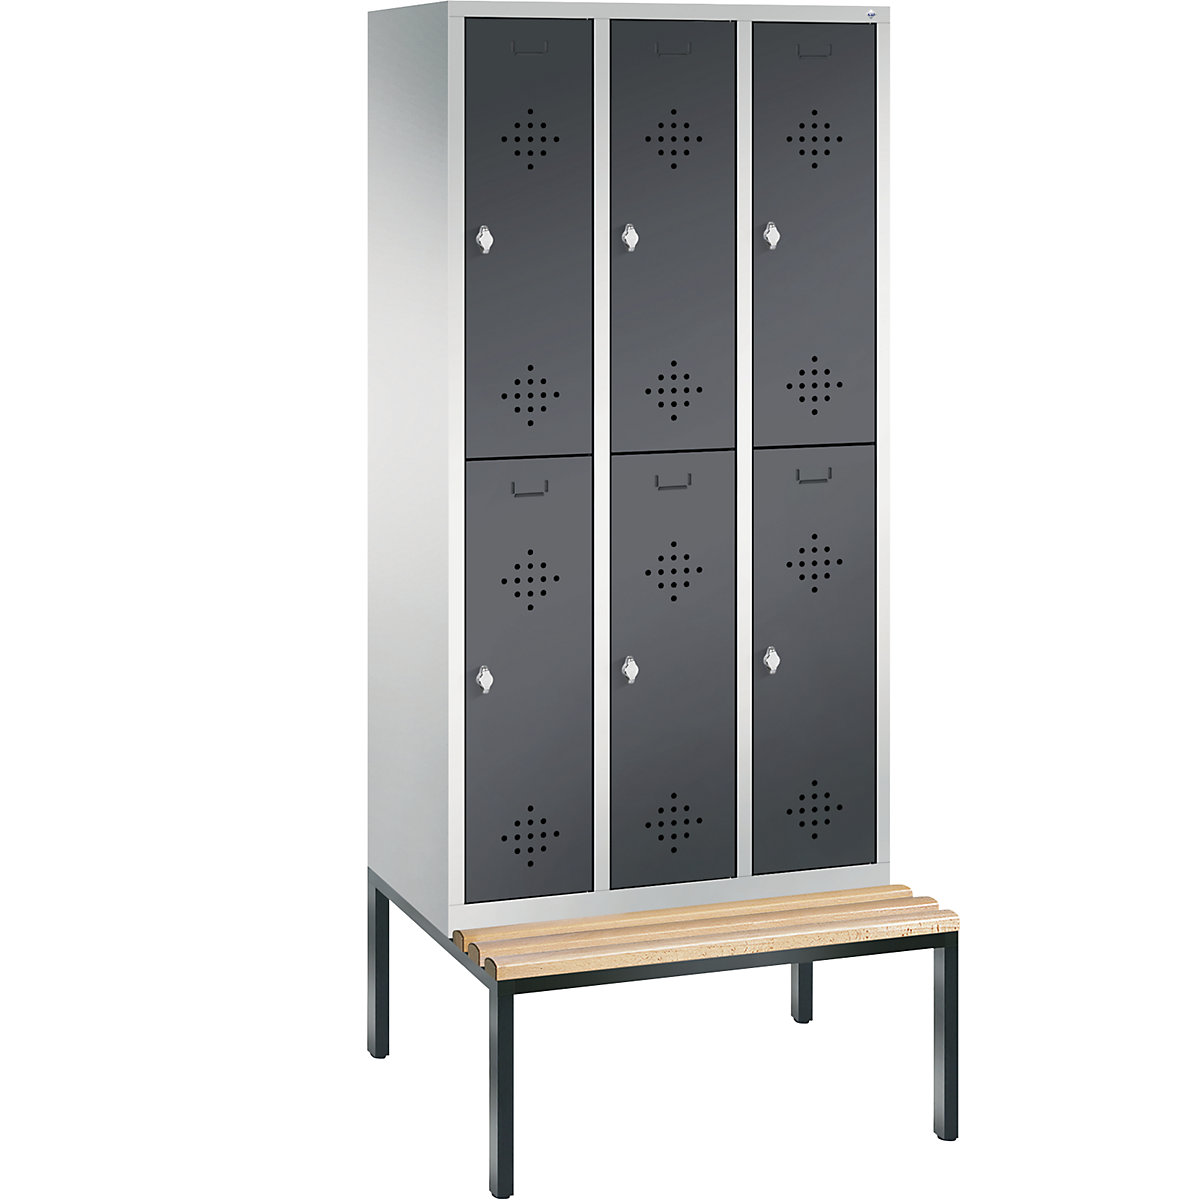 CLASSIC cloakroom locker with bench mounted underneath, double tier – C+P